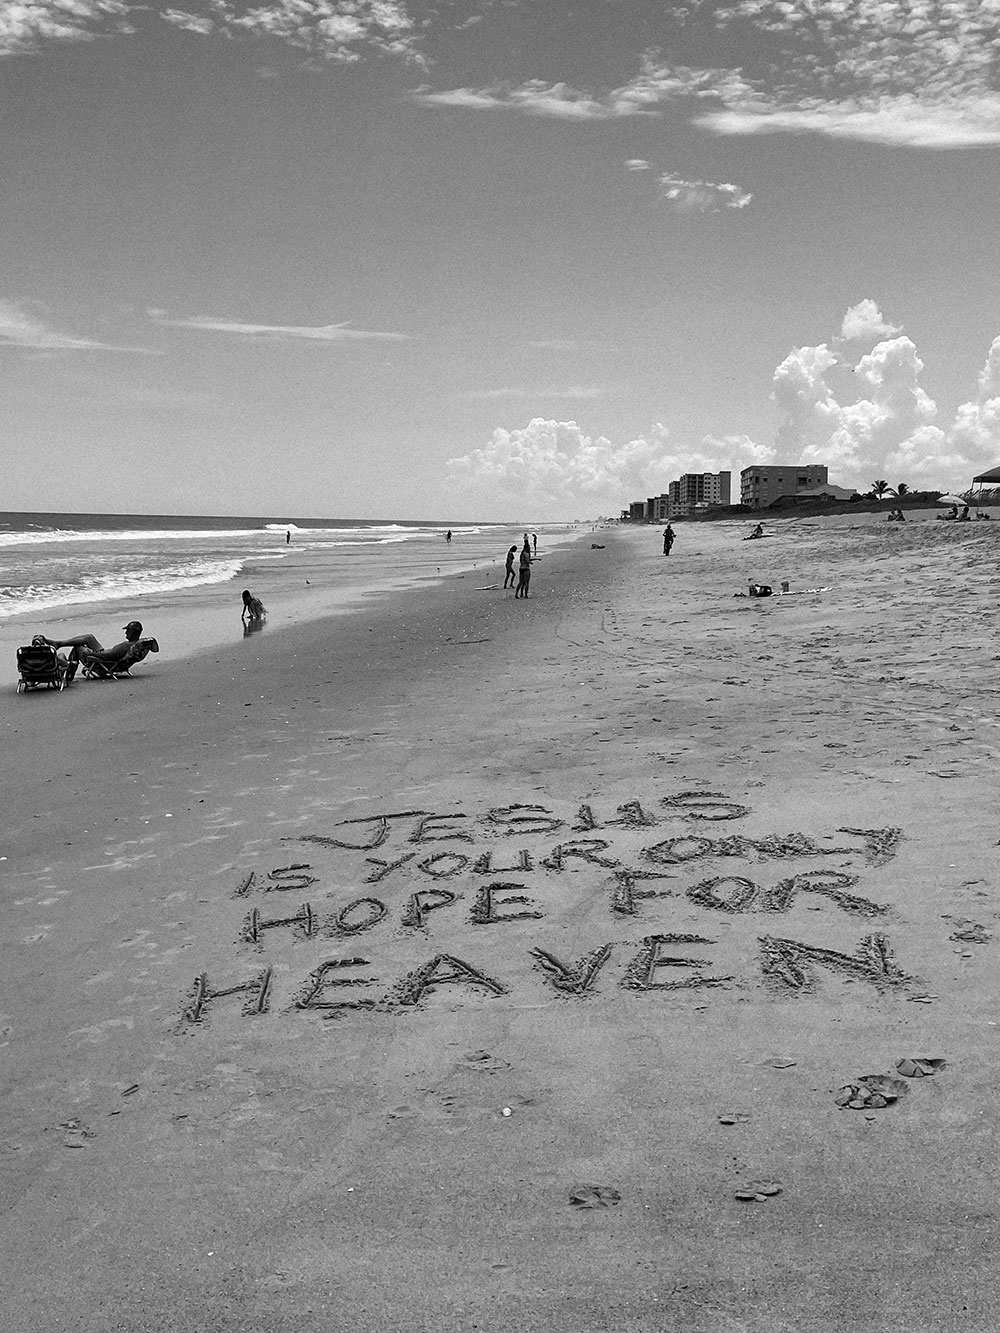 jesus is your hope for heaven written in sand on the beach